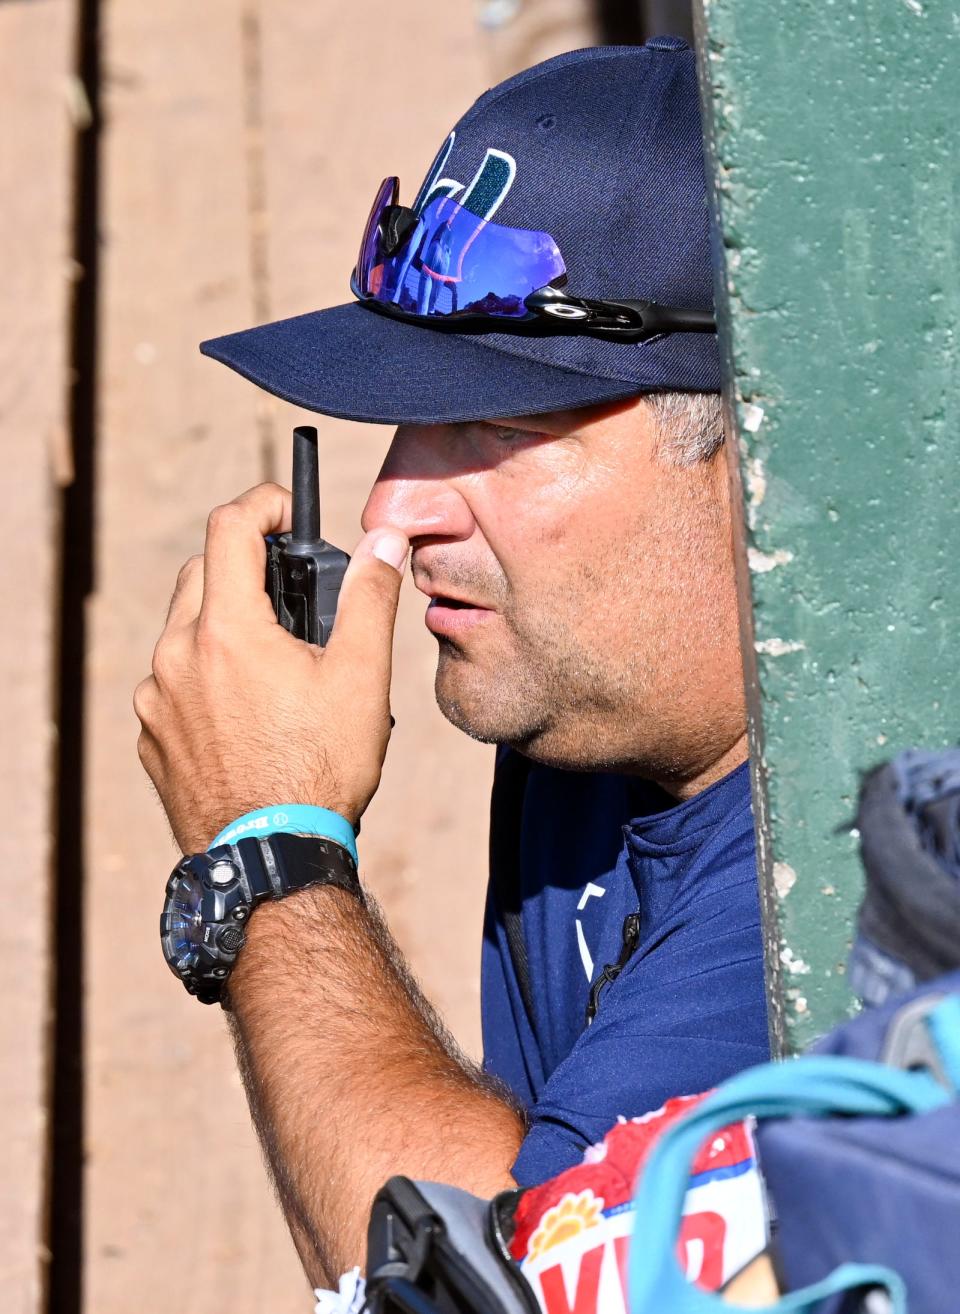 Calls to the catcher come from Brewster Whitecaps pitching coach Jason "Razz" Rathbun during the July 12 game against the Y-D Red Sox in South Yarmouth.